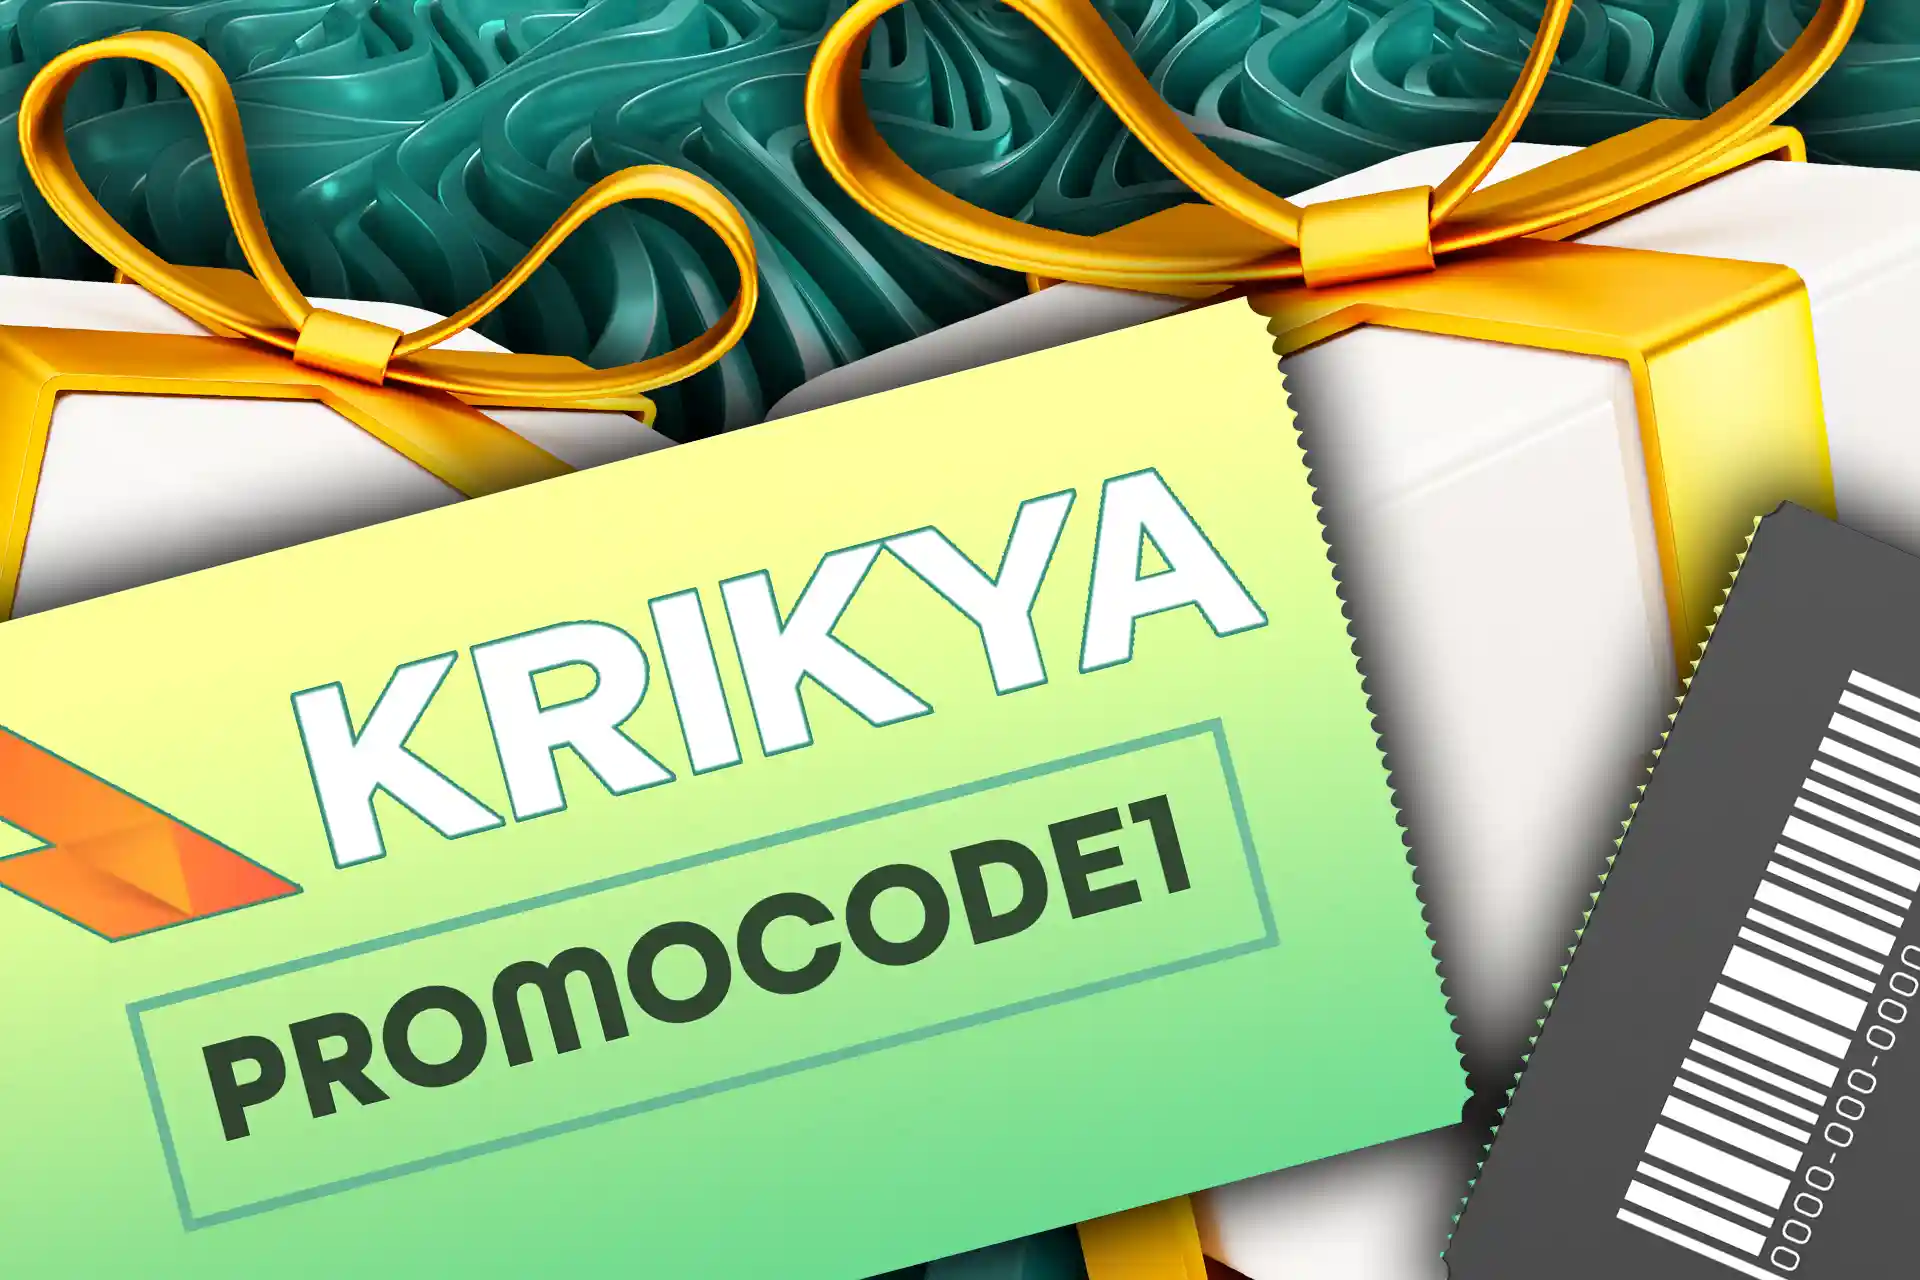 Use our special promo code to get the Krikya welcome bonus.